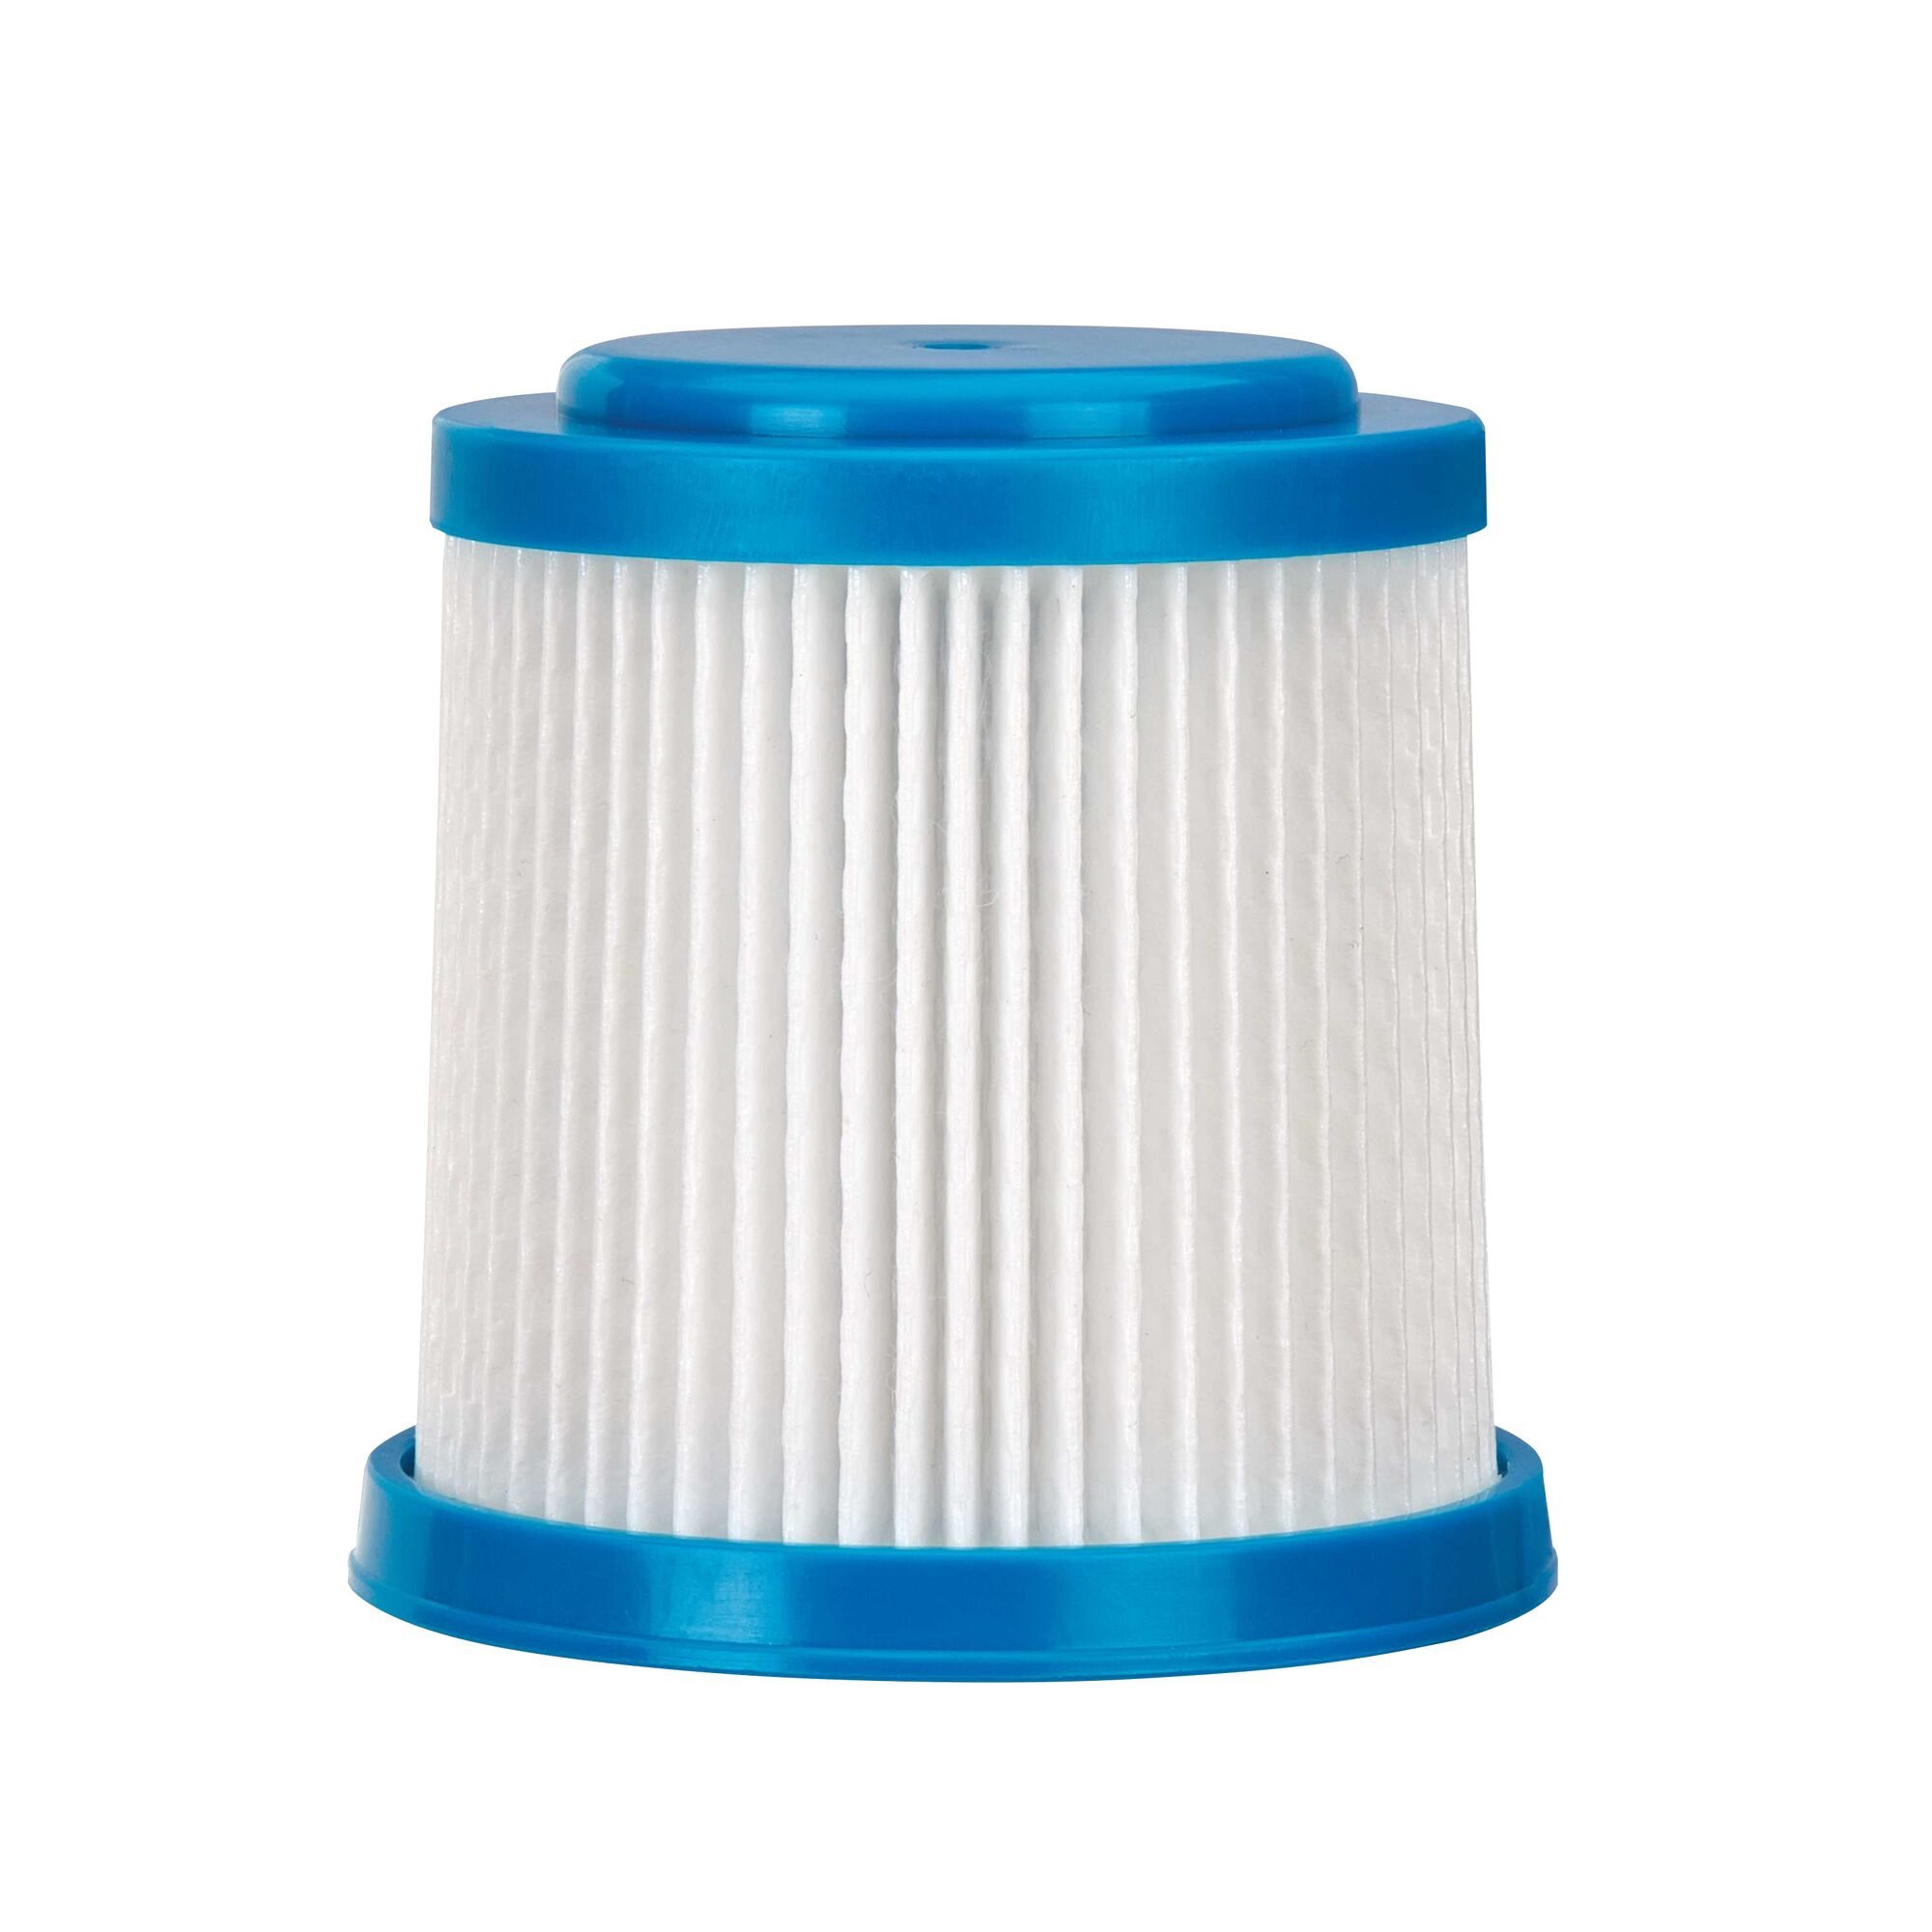 Replacement Pleated Filter for Smartech Stick Vacuum.